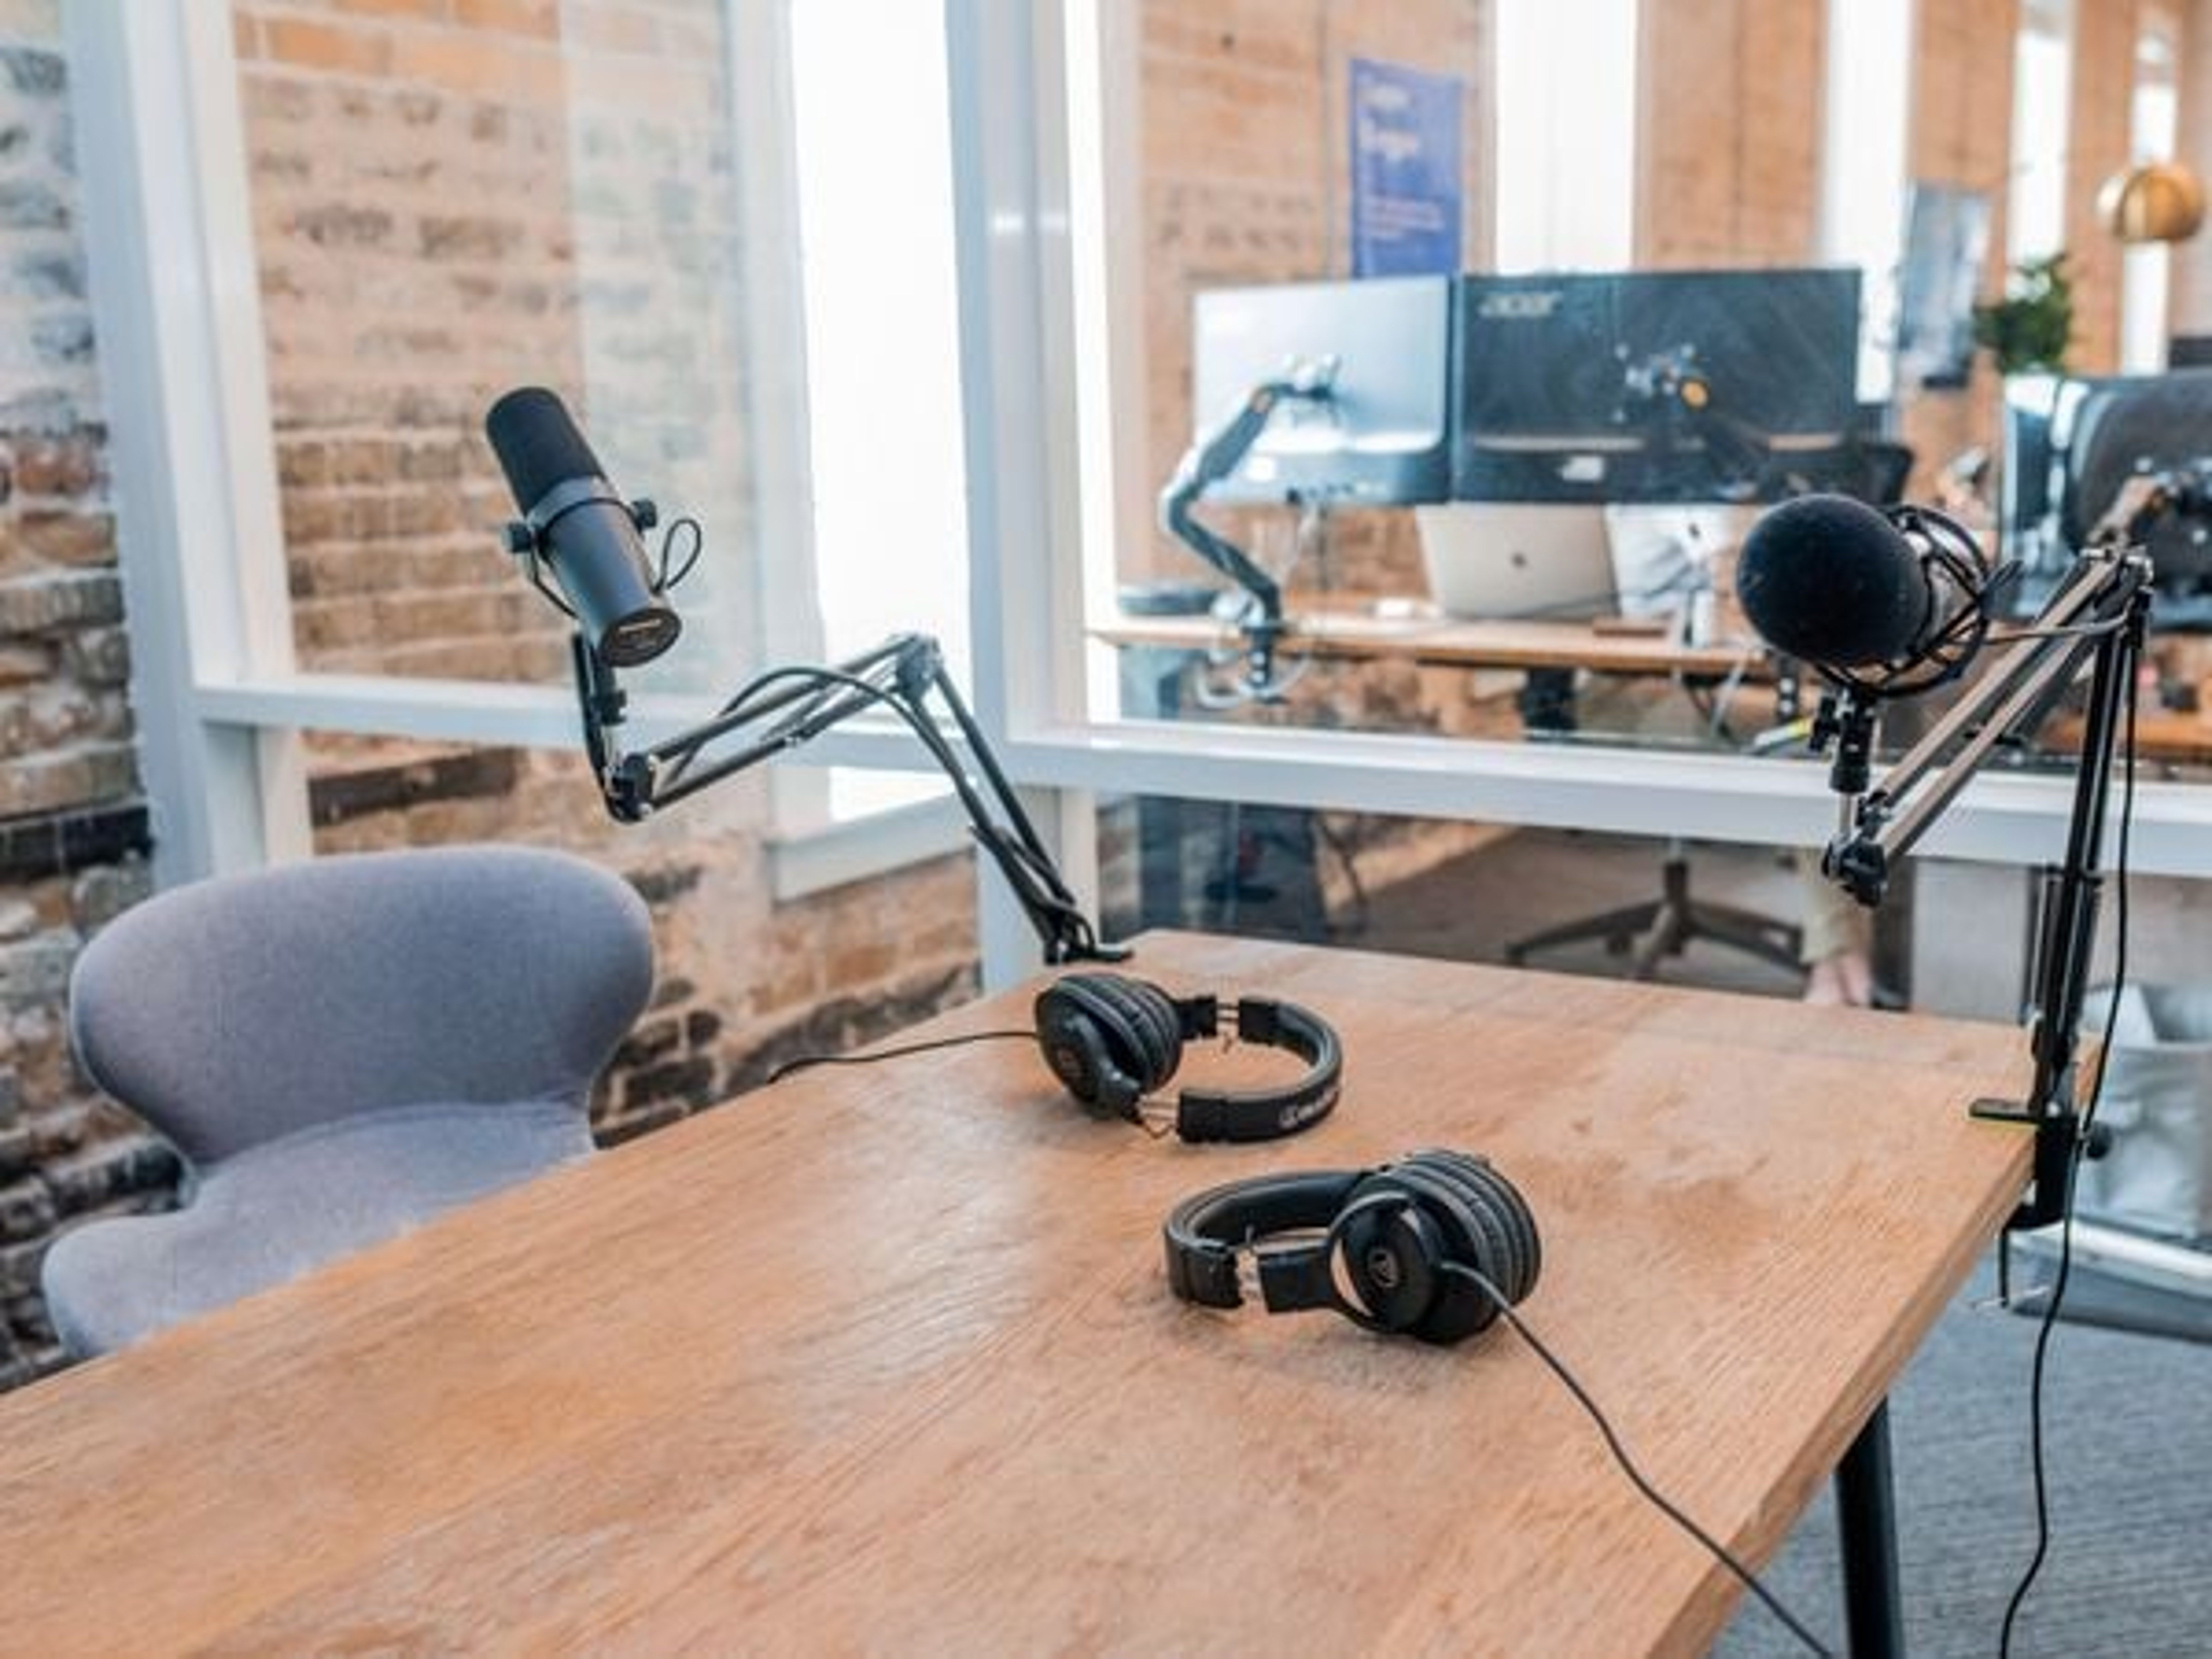 Podcasting for Beginners: The Complete Guide to Getting Started With Podcasts